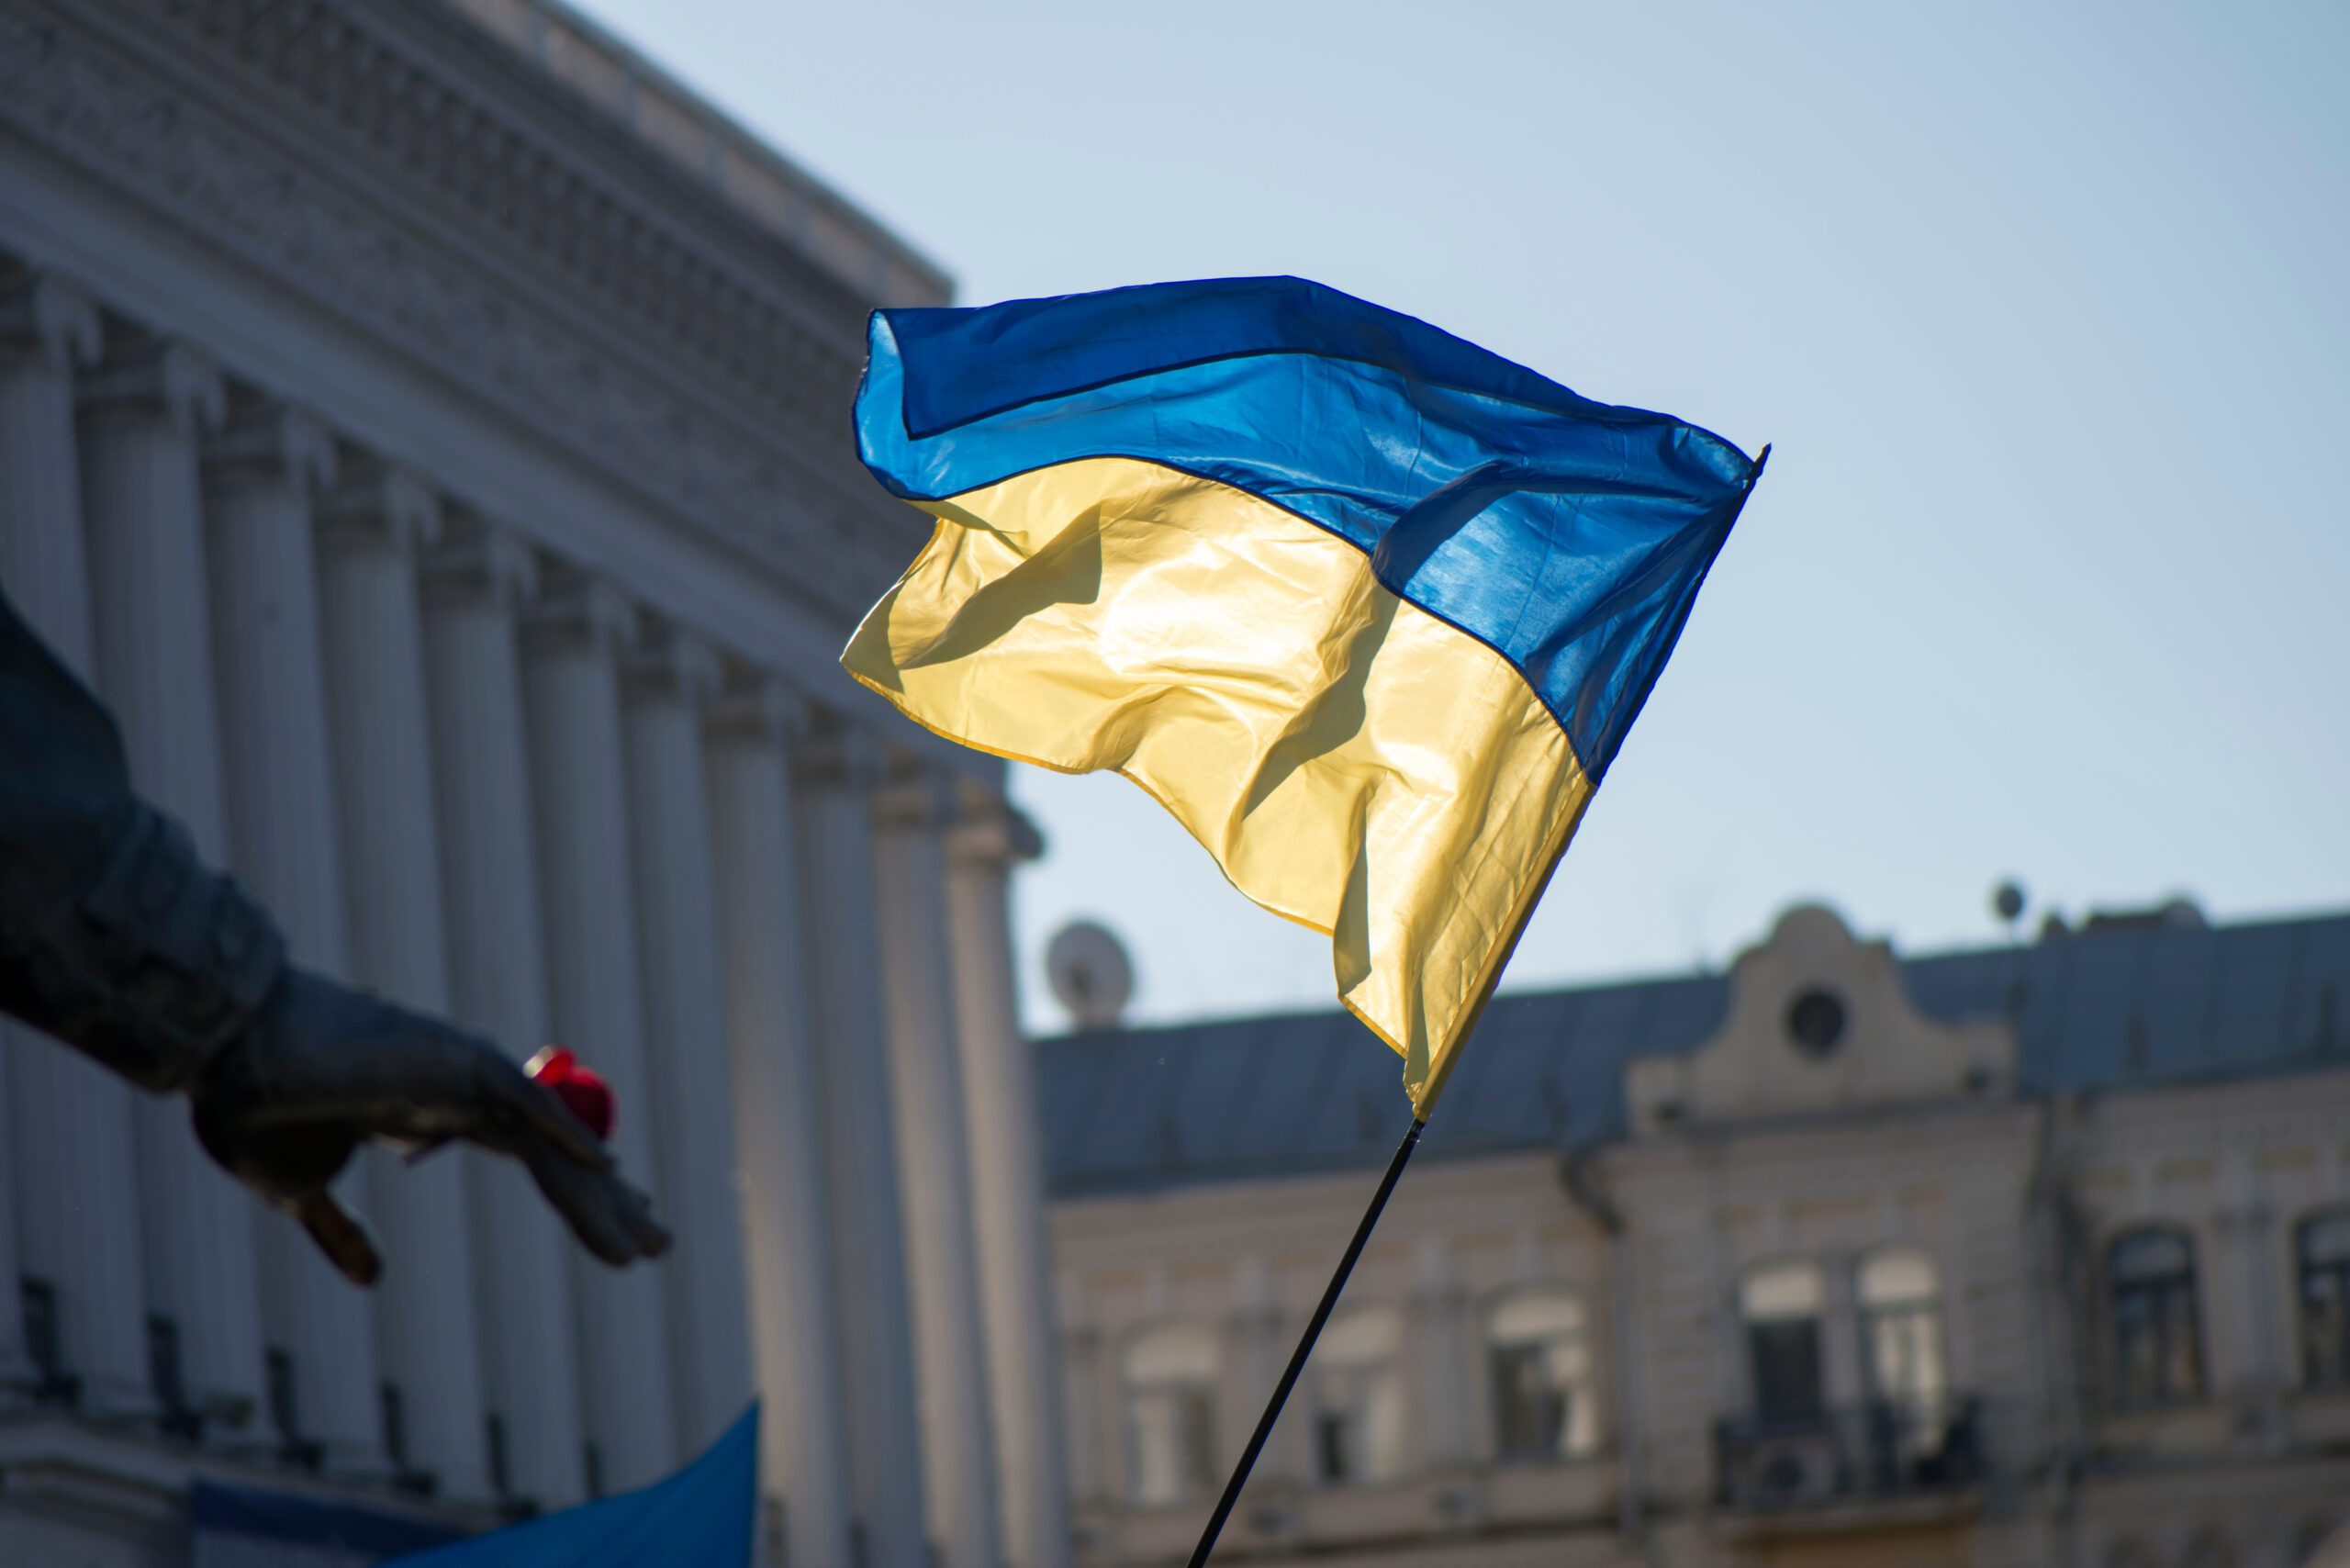 A Ukrainian flag is flying in front of a charity building.